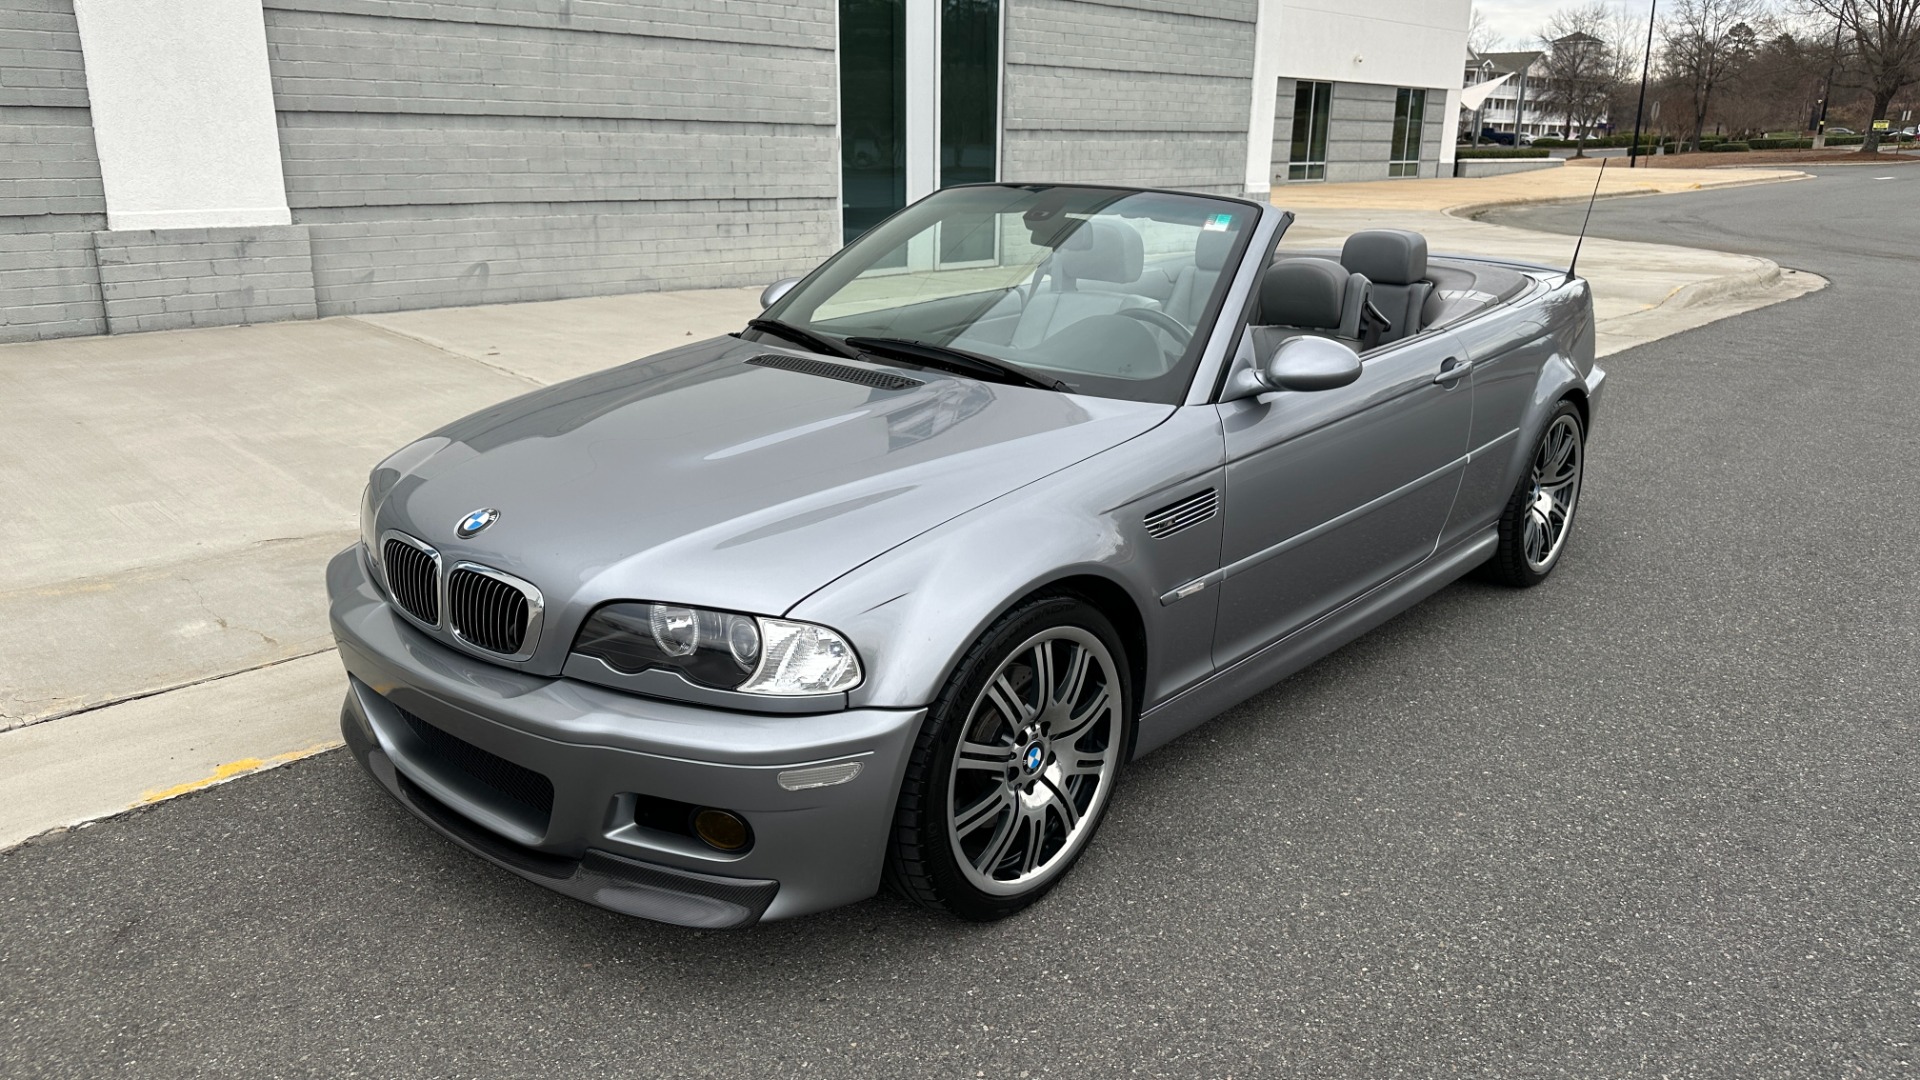 Used 2006 BMW M3 CONVERTIBLE / SMG AUTO / LEATHER / INLINE 6CYL / CARBON FIBER for sale $26,595 at Formula Imports in Charlotte NC 28227 5